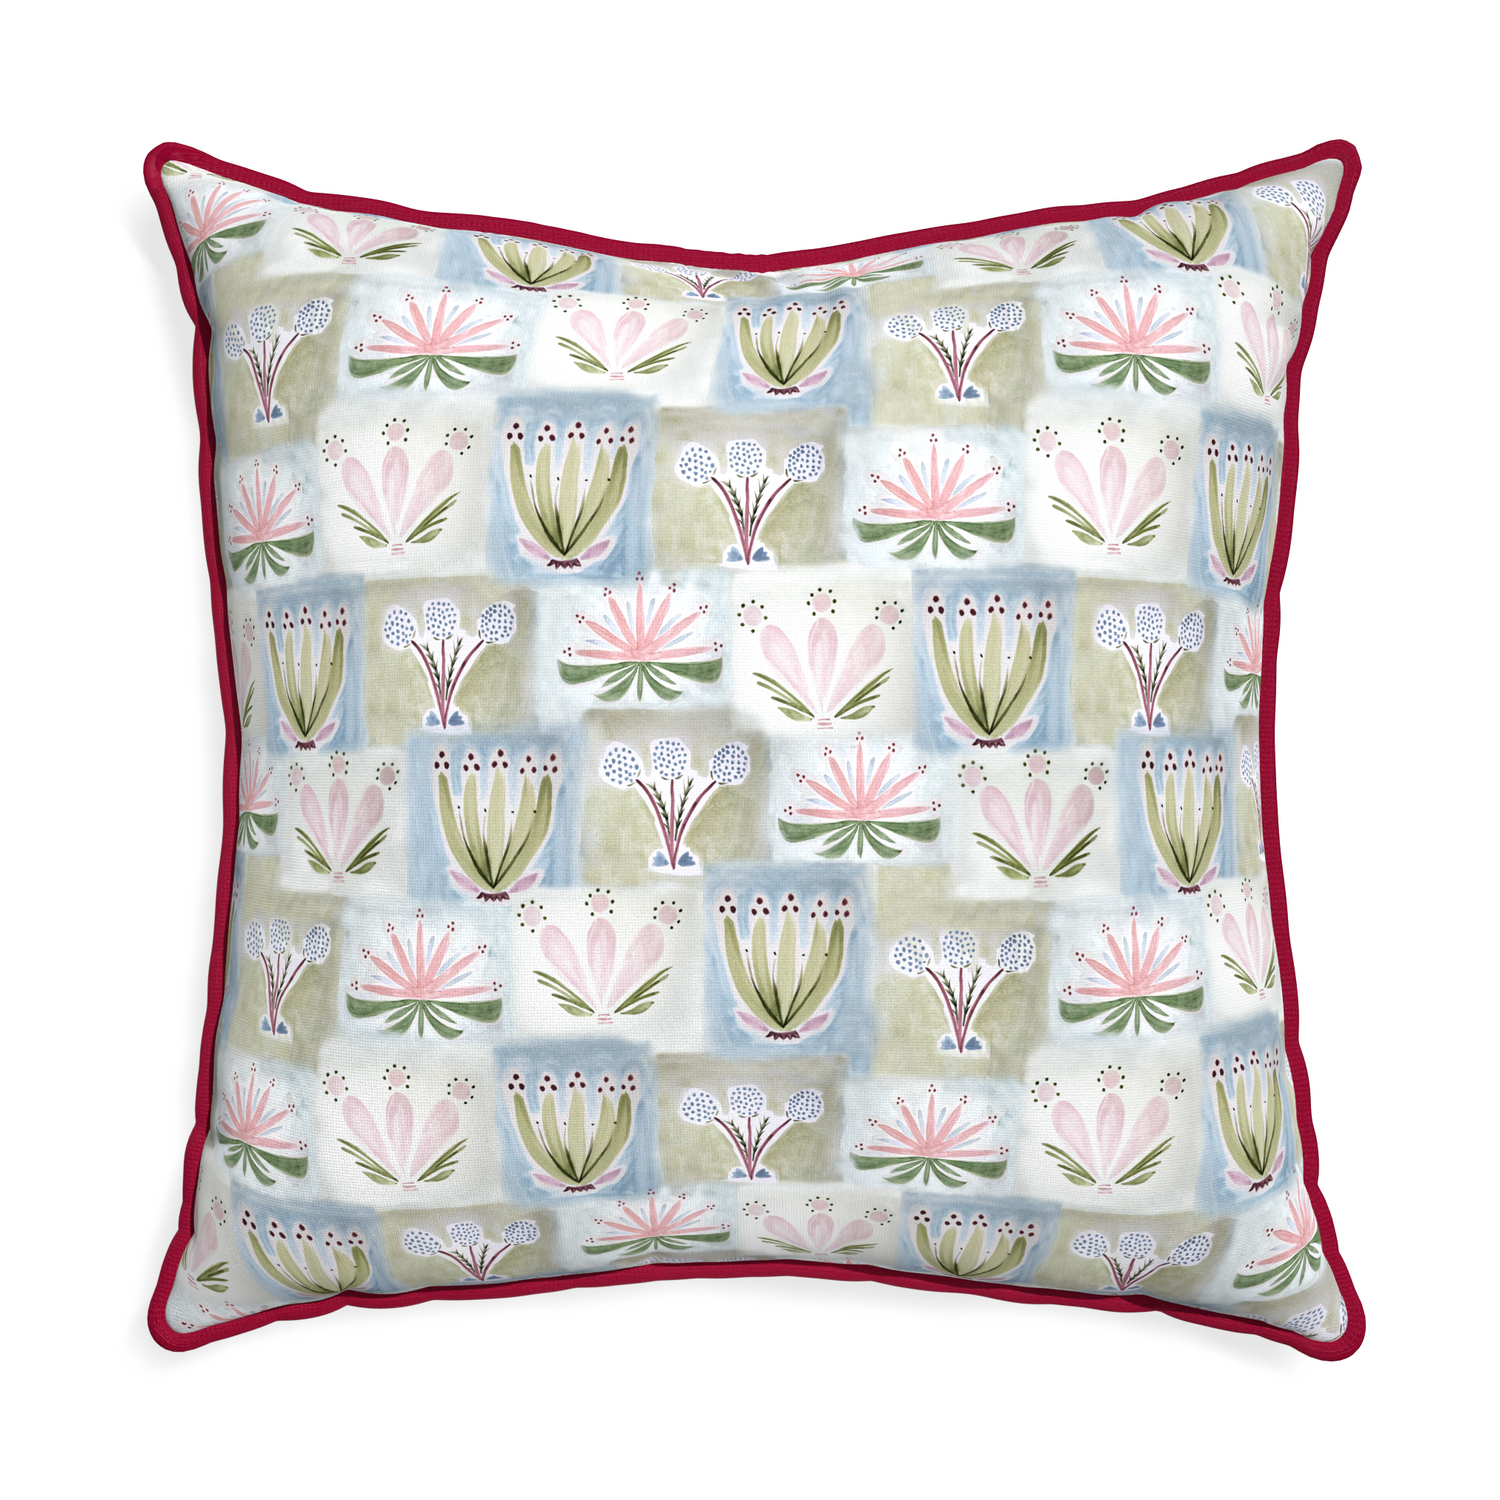 Euro-sham harper custom hand-painted floralpillow with raspberry piping on white background